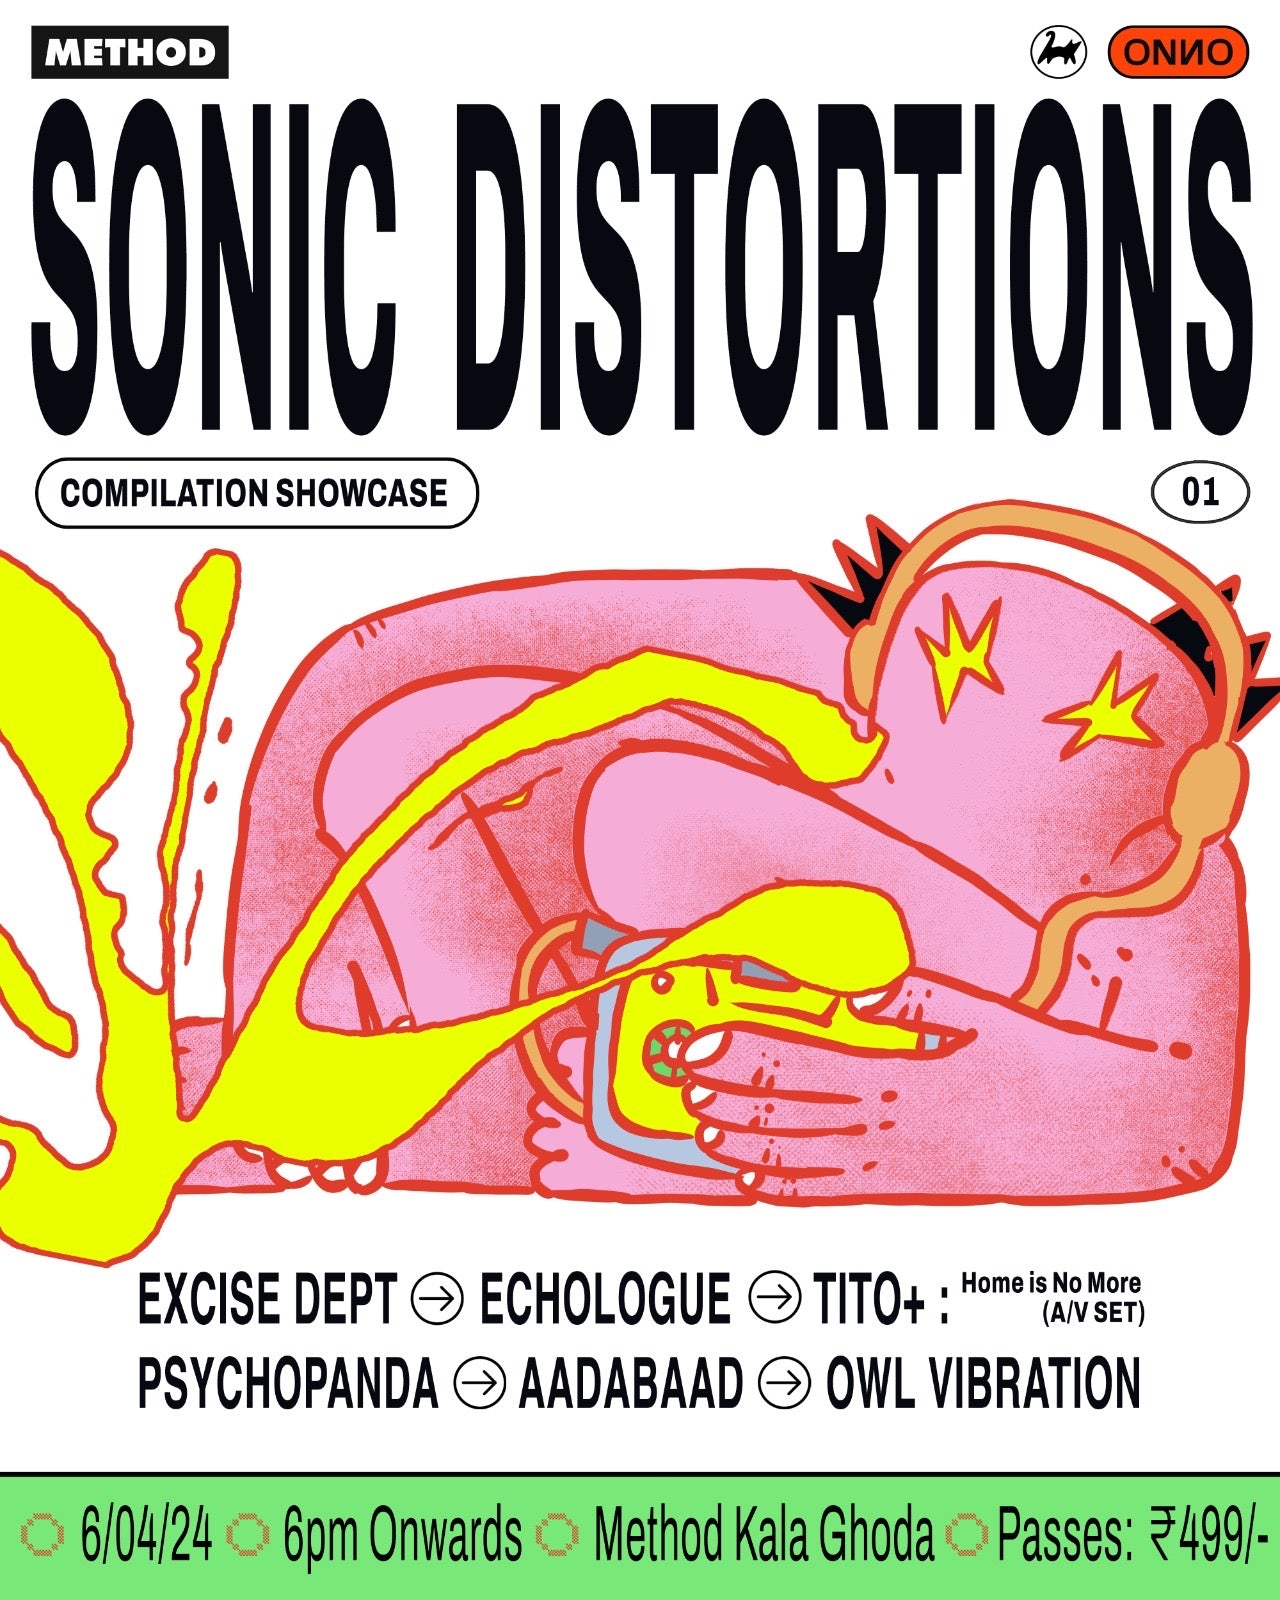 Sonic Distortions | ONNO Compliation Showcase